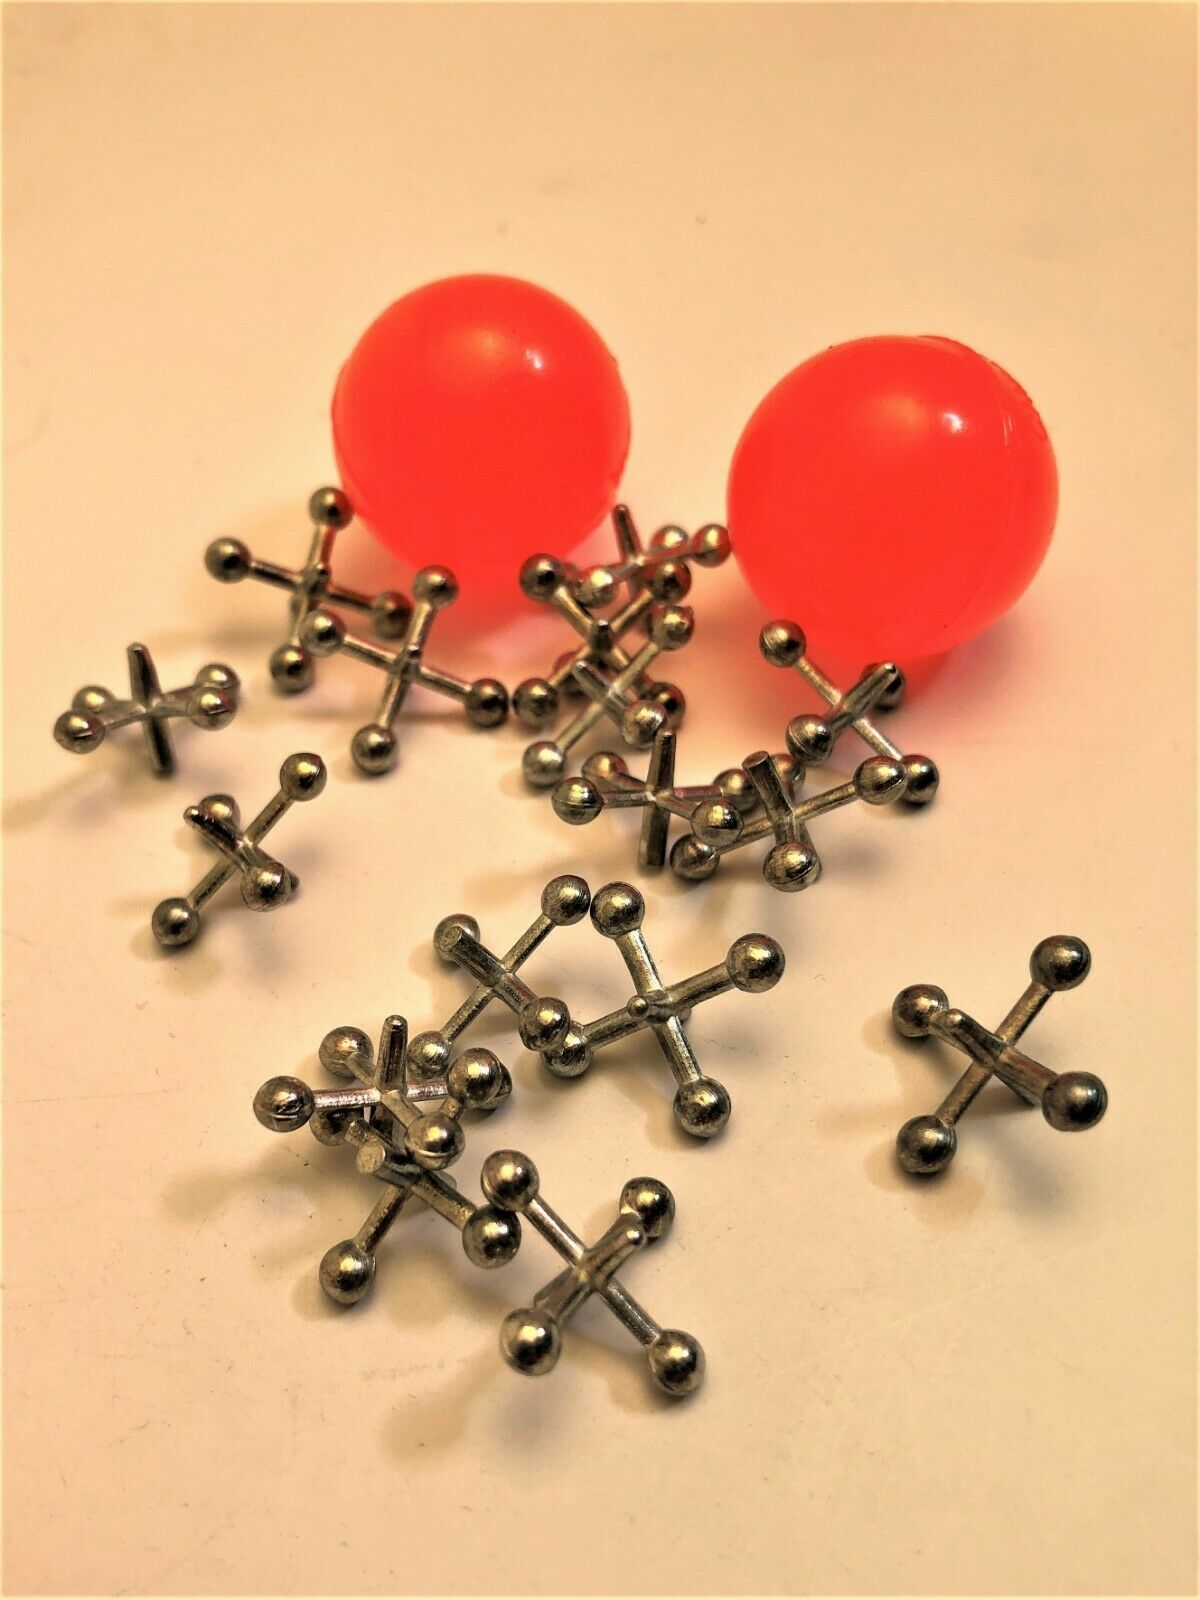 Classic Fun Toy Game with 16 Metal Jacks and 2 Red Rubber Balls